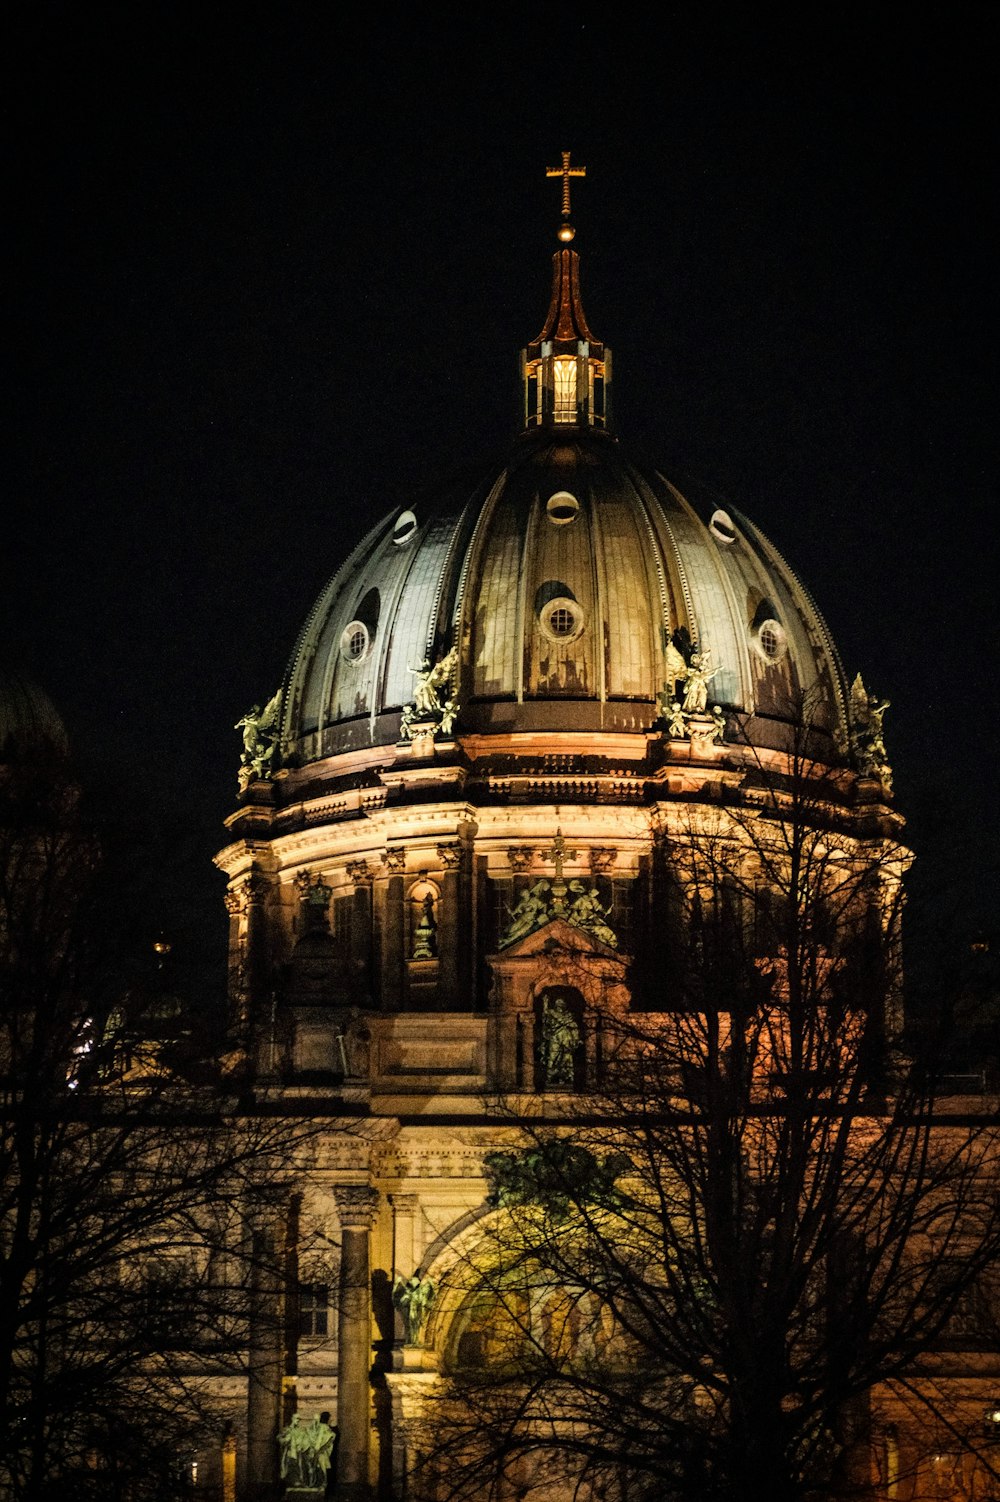 the dome of a building lit up at night